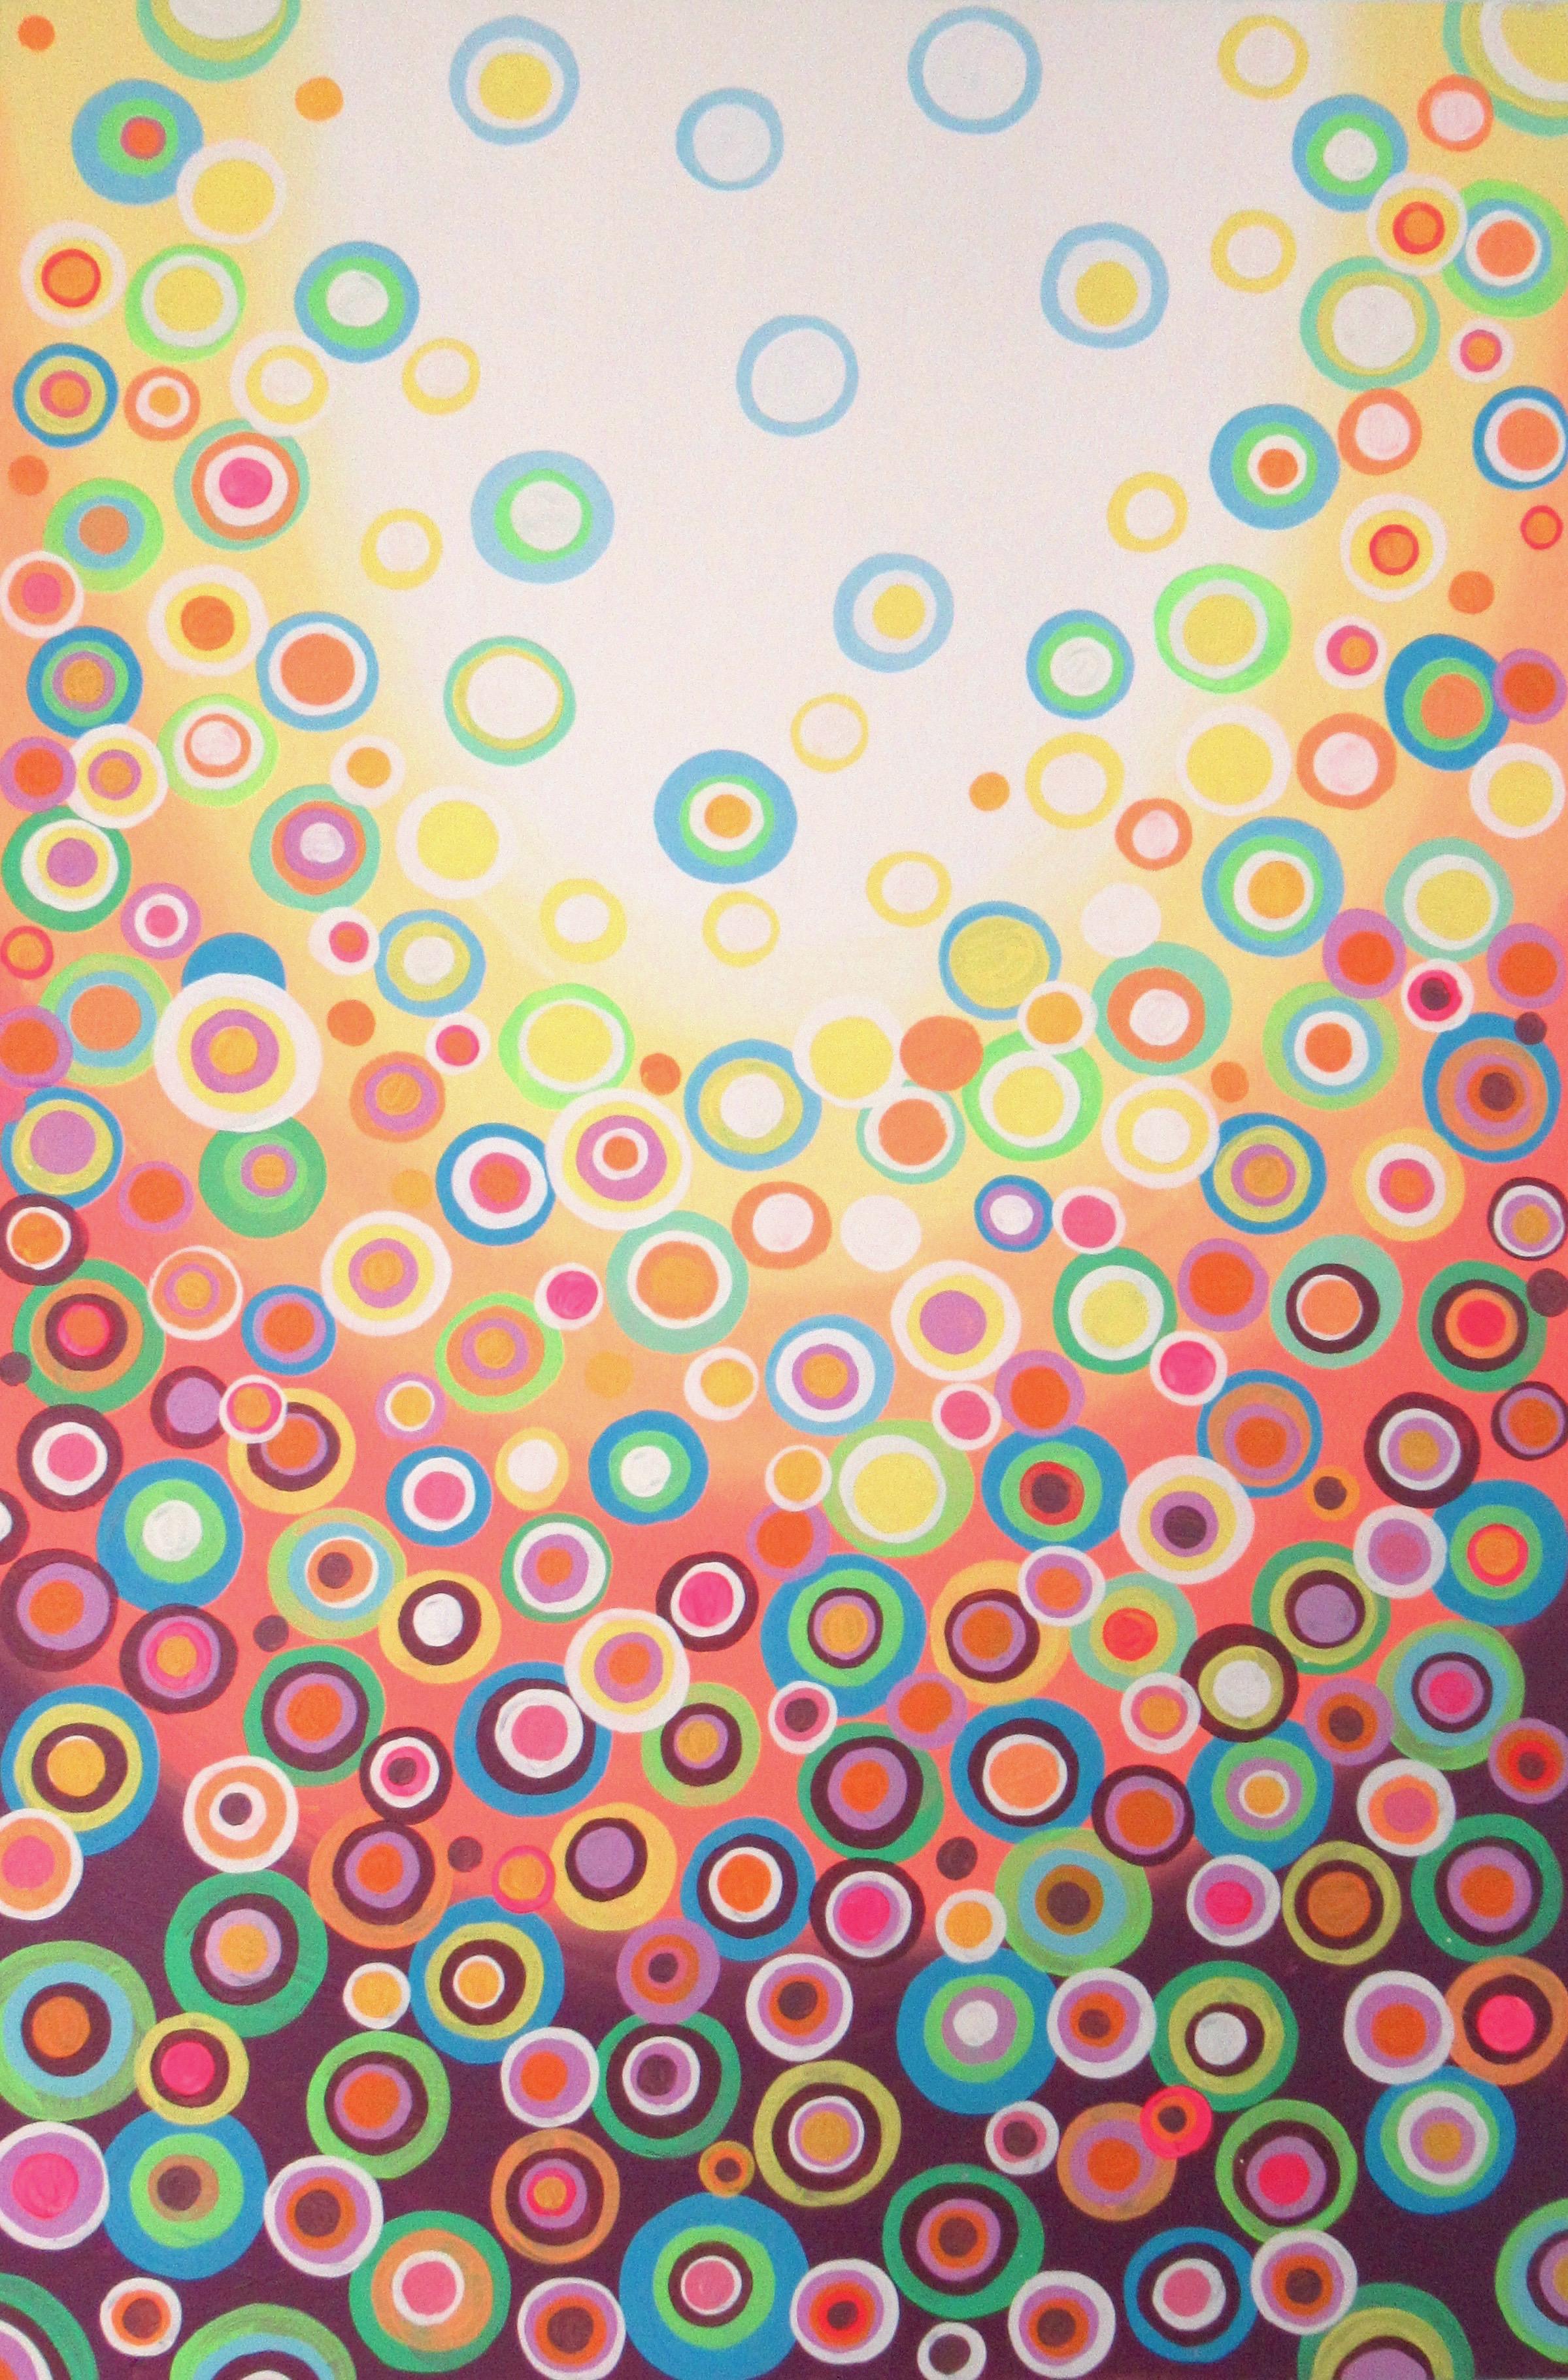 <p>Artist Comments<br />Part of Natasha's signature circles series. Loose, geometric abstraction of land and sky. Suggestion of the sun shining on a field of flowers. Warm yellow and orange nicely contrasted with green, blue and mauve. The gallery